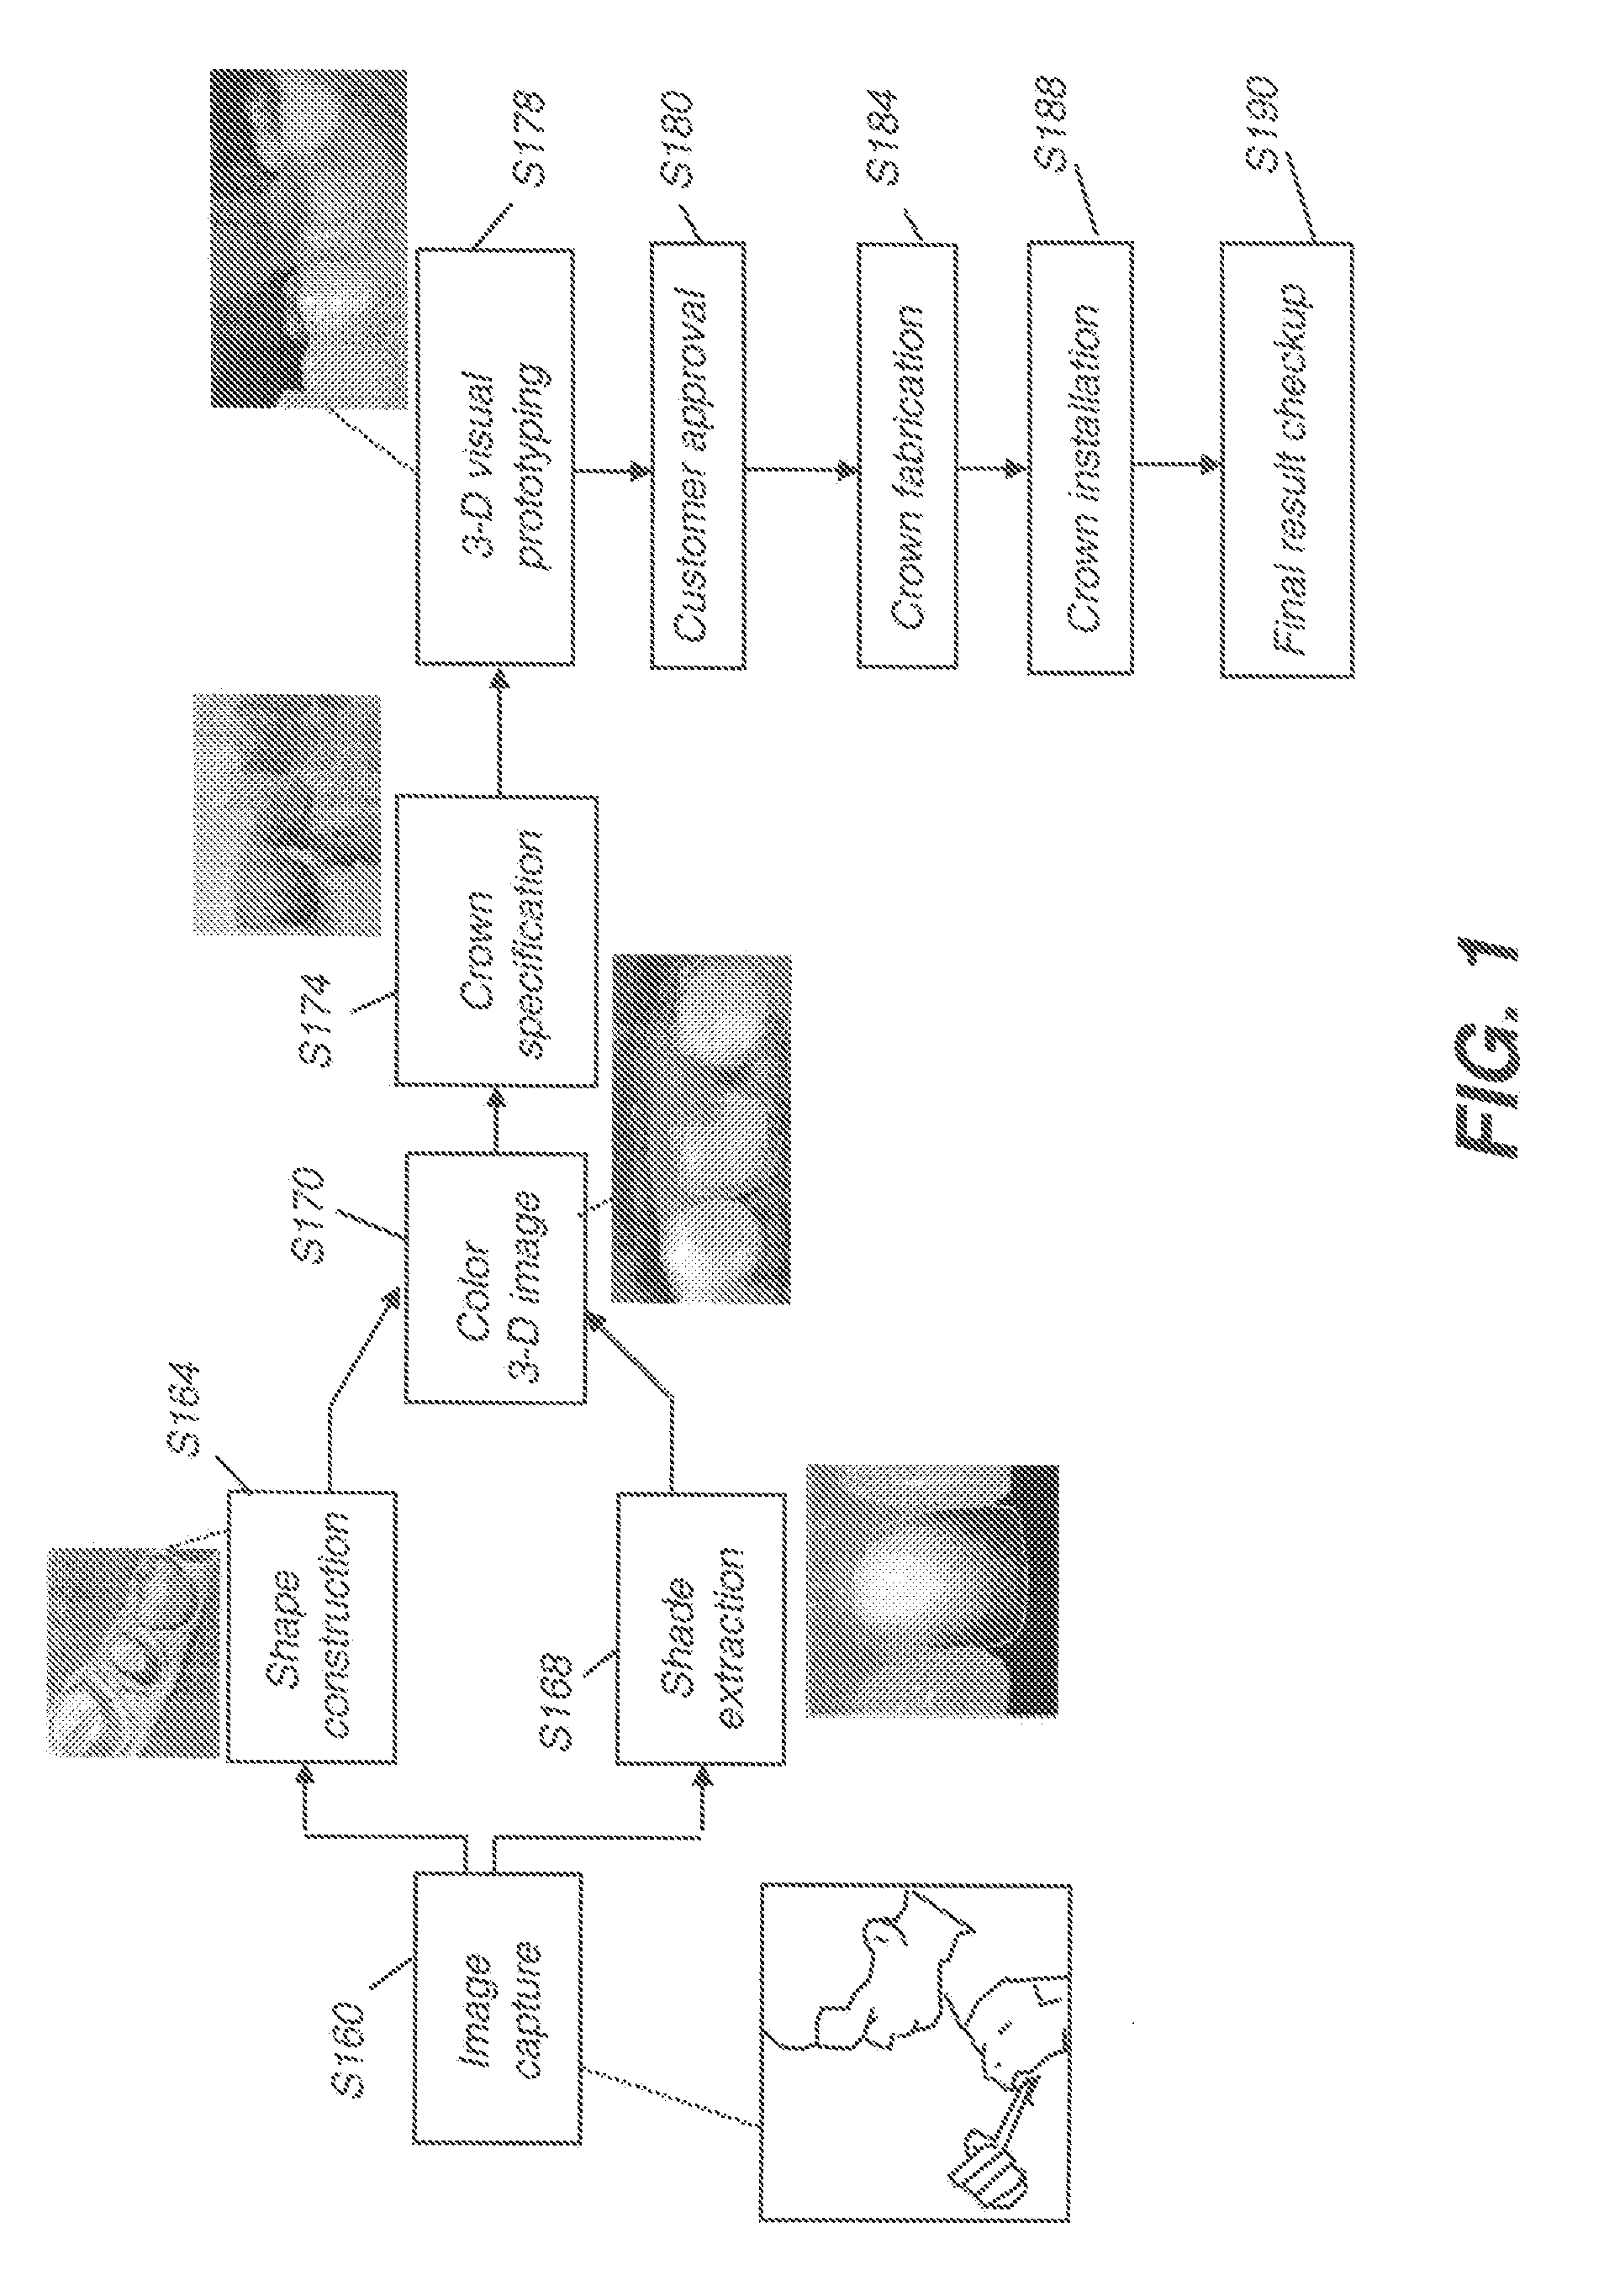 Apparatus for dental surface shape and shade imaging